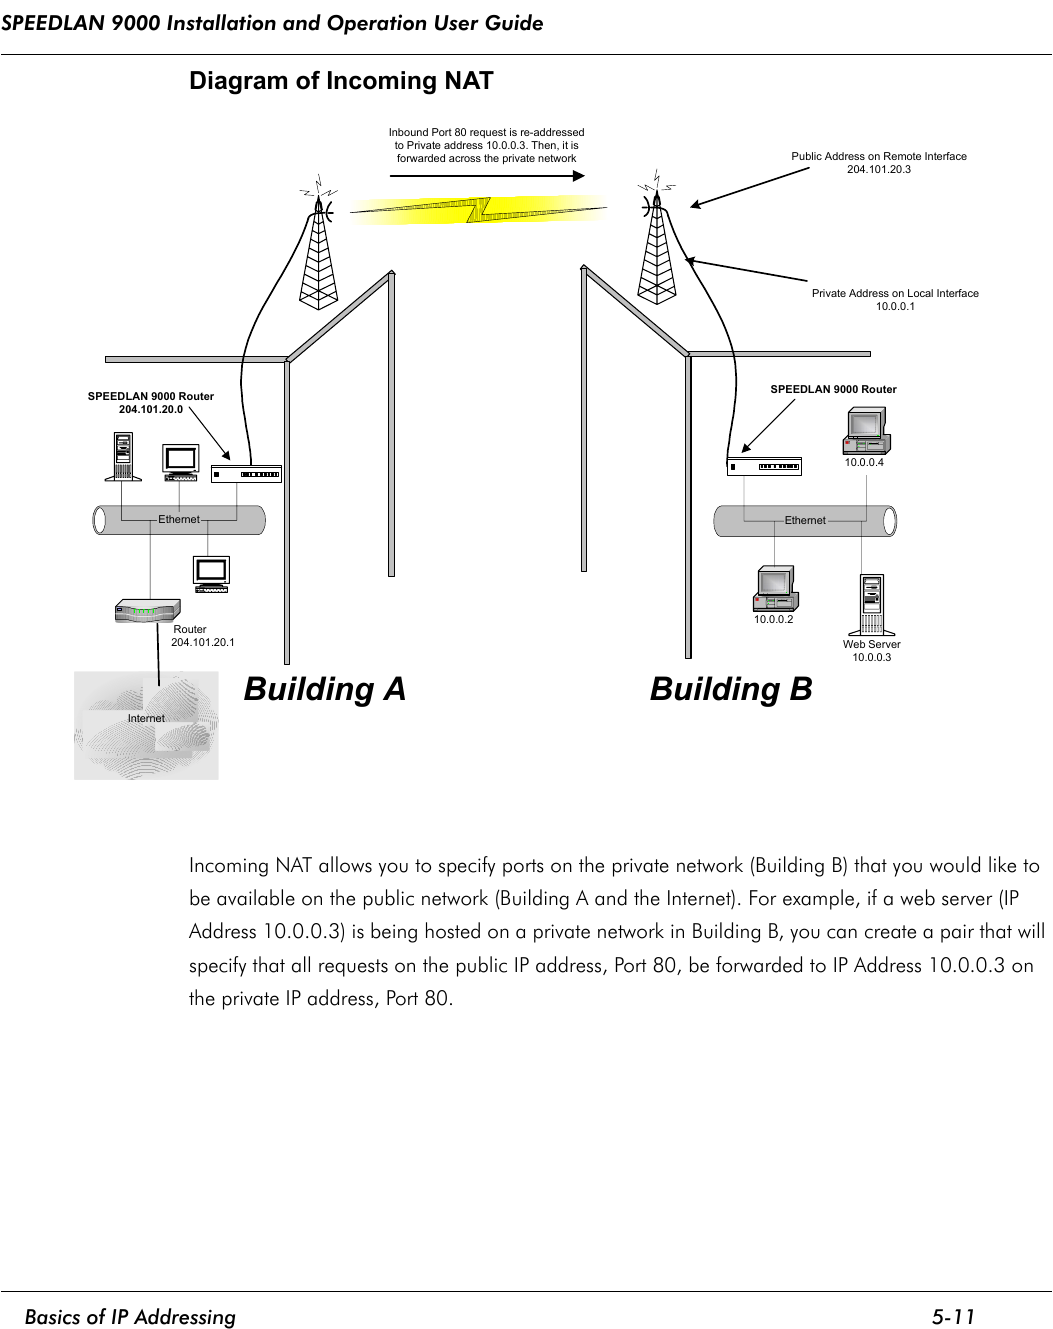 SPEEDLAN 9000 Installation and Operation User Guide     Basics of IP Addressing 5-11                                                                                                                                                              Diagram of Incoming NATIncoming NAT allows you to specify ports on the private network (Building B) that you would like to be available on the public network (Building A and the Internet). For example, if a web server (IP Address 10.0.0.3) is being hosted on a private network in Building B, you can create a pair that will specify that all requests on the public IP address, Port 80, be forwarded to IP Address 10.0.0.3 on the private IP address, Port 80.Inbound Port 80 request is re-addressedto Private address 10.0.0.3. Then, it isforwarded across the private networkInternetEthernet                               Router                                        204.101.20.1Private Address on Local Interface10.0.0.110.0.0.210.0.0.4EthernetWeb Server10.0.0.3Public Address on Remote Interface204.101.20.3Building A Building BSPEEDLAN 9000 Router204.101.20.0SPEEDLAN 9000 Router